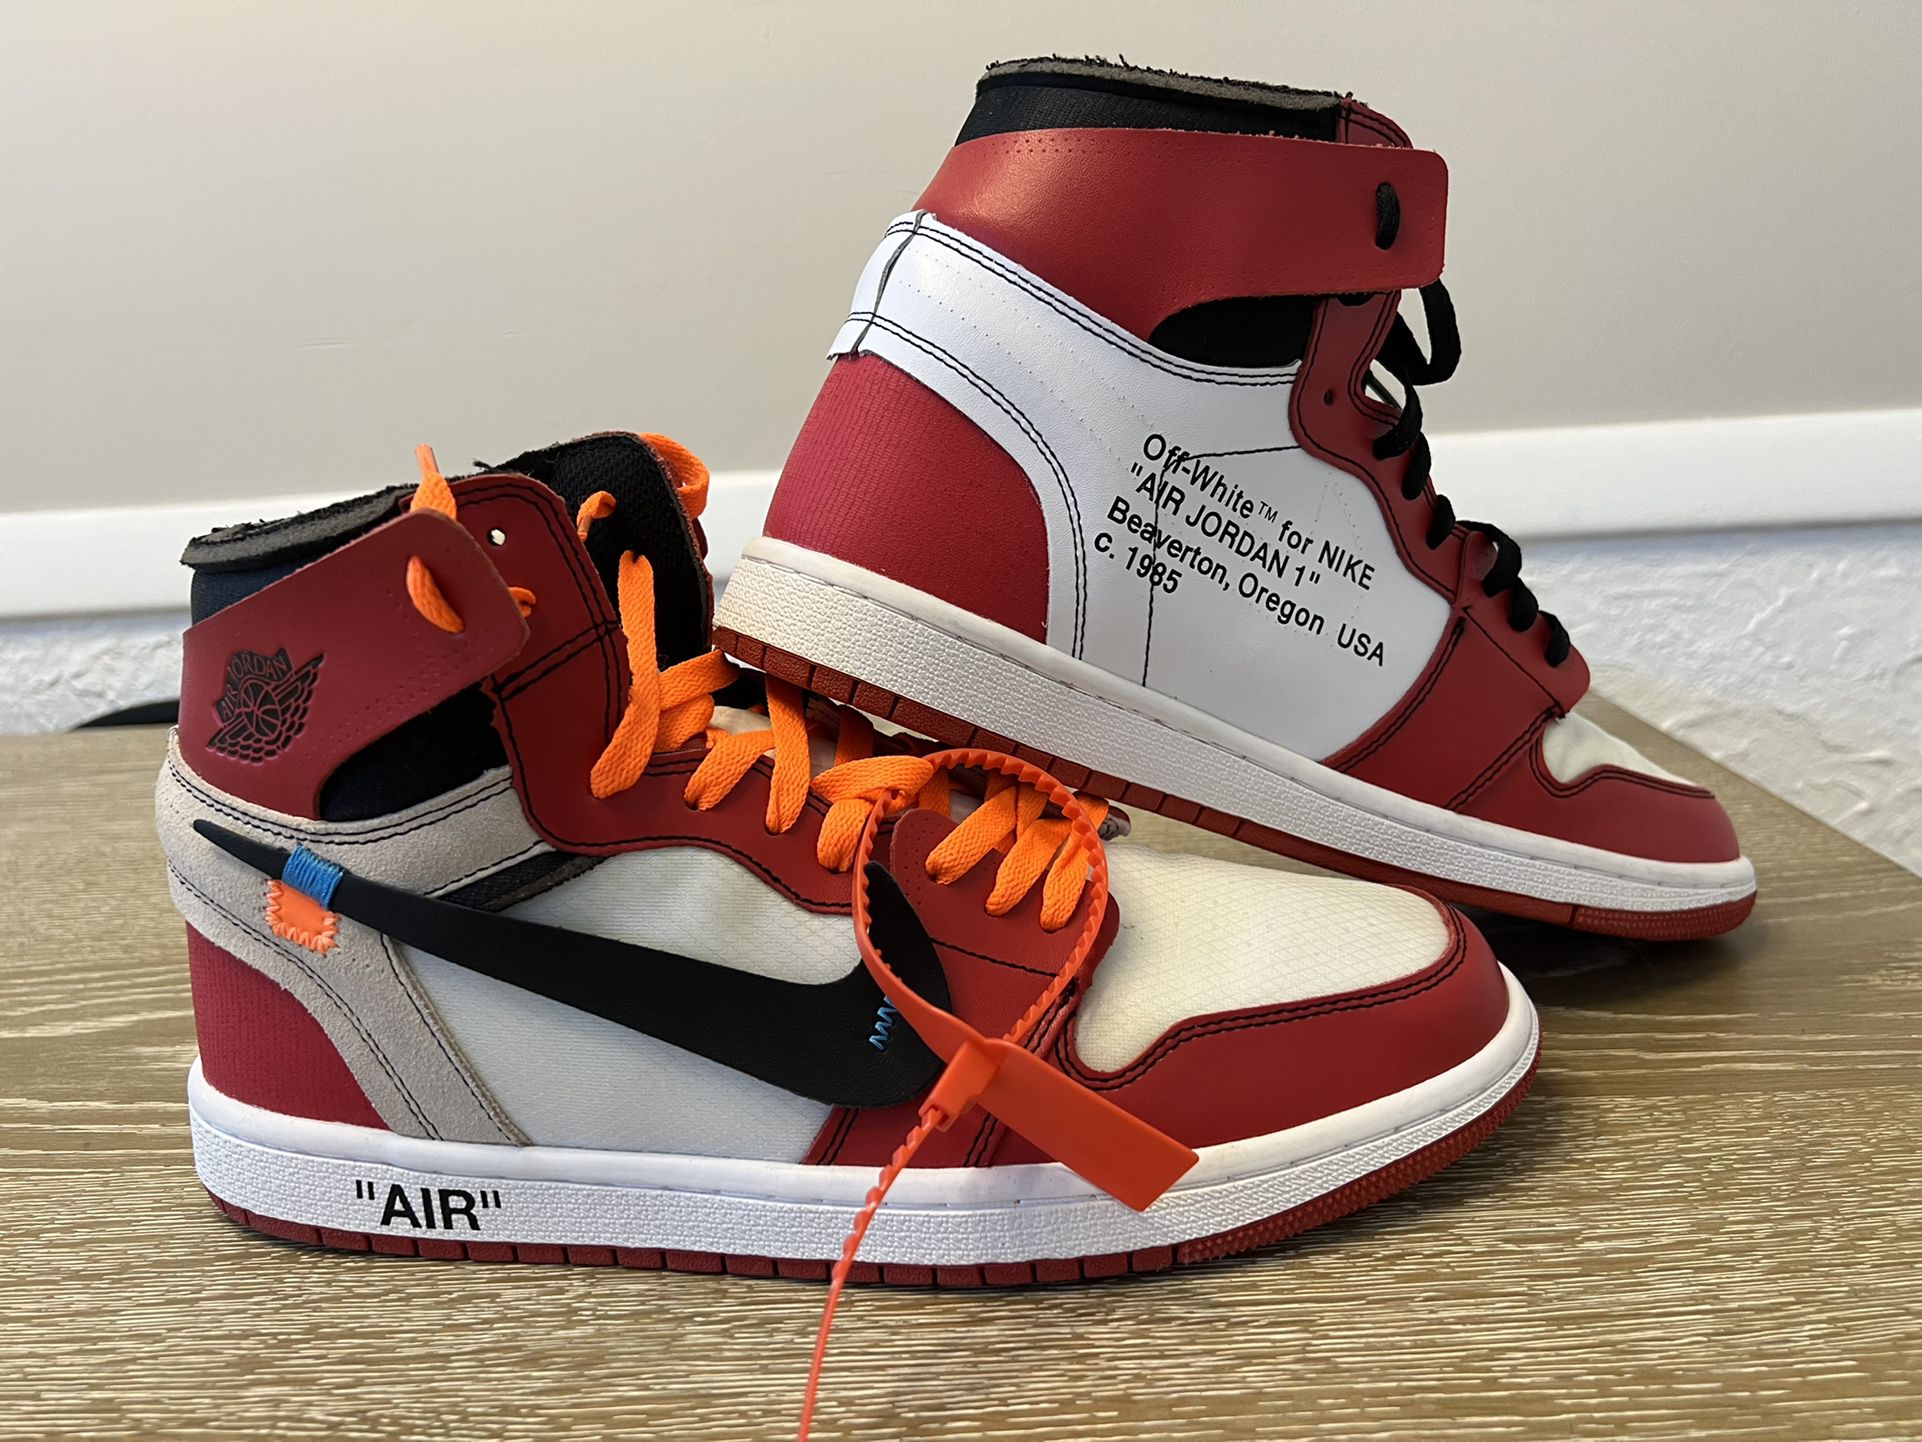 Nike Air Jordan Off White Chicago Sale River, - OfferUp